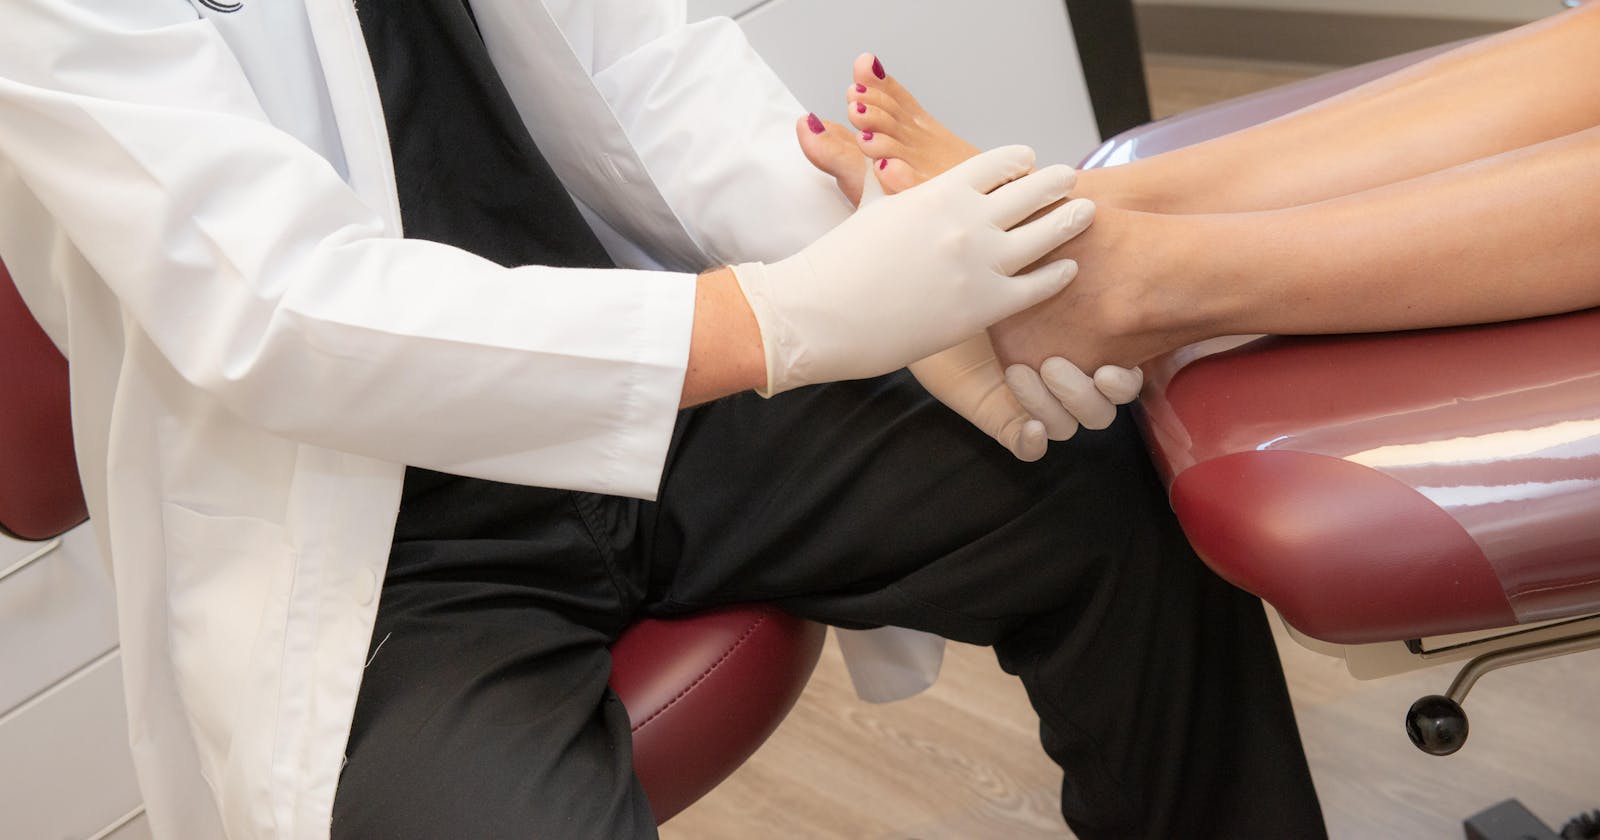 Stepping Towards Relief: Finding Expert Foot Care with Macomb Foot, Ankle & Wound Care in Warren